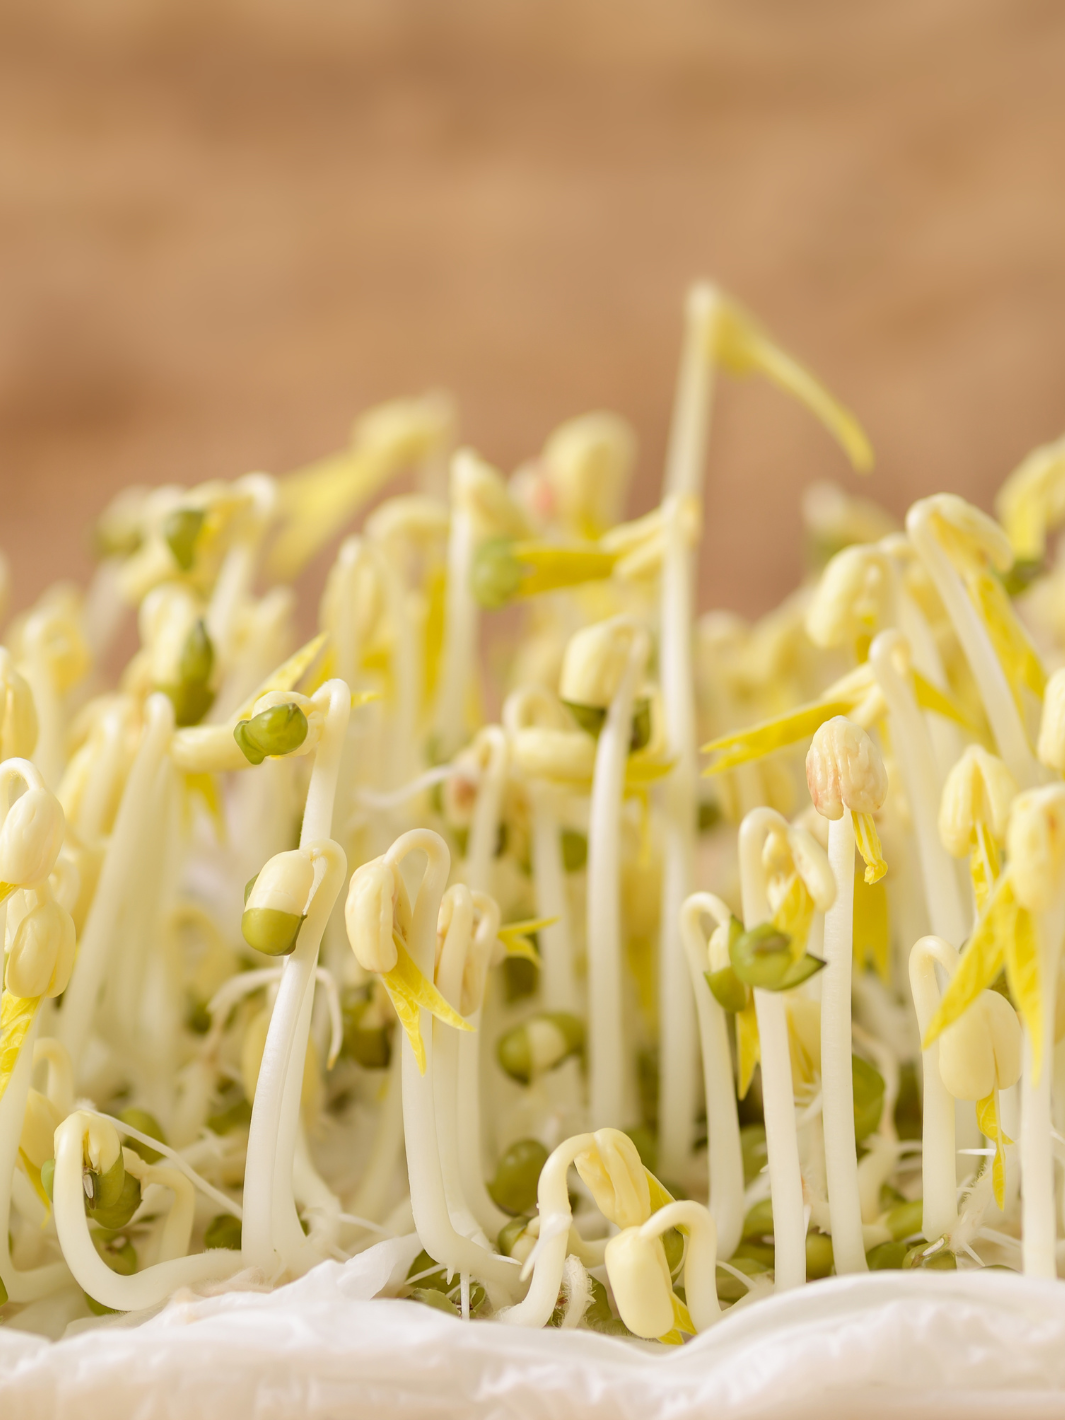 Sprouts from Handy Pantry Organic Mung Bean Sprouting Seeds